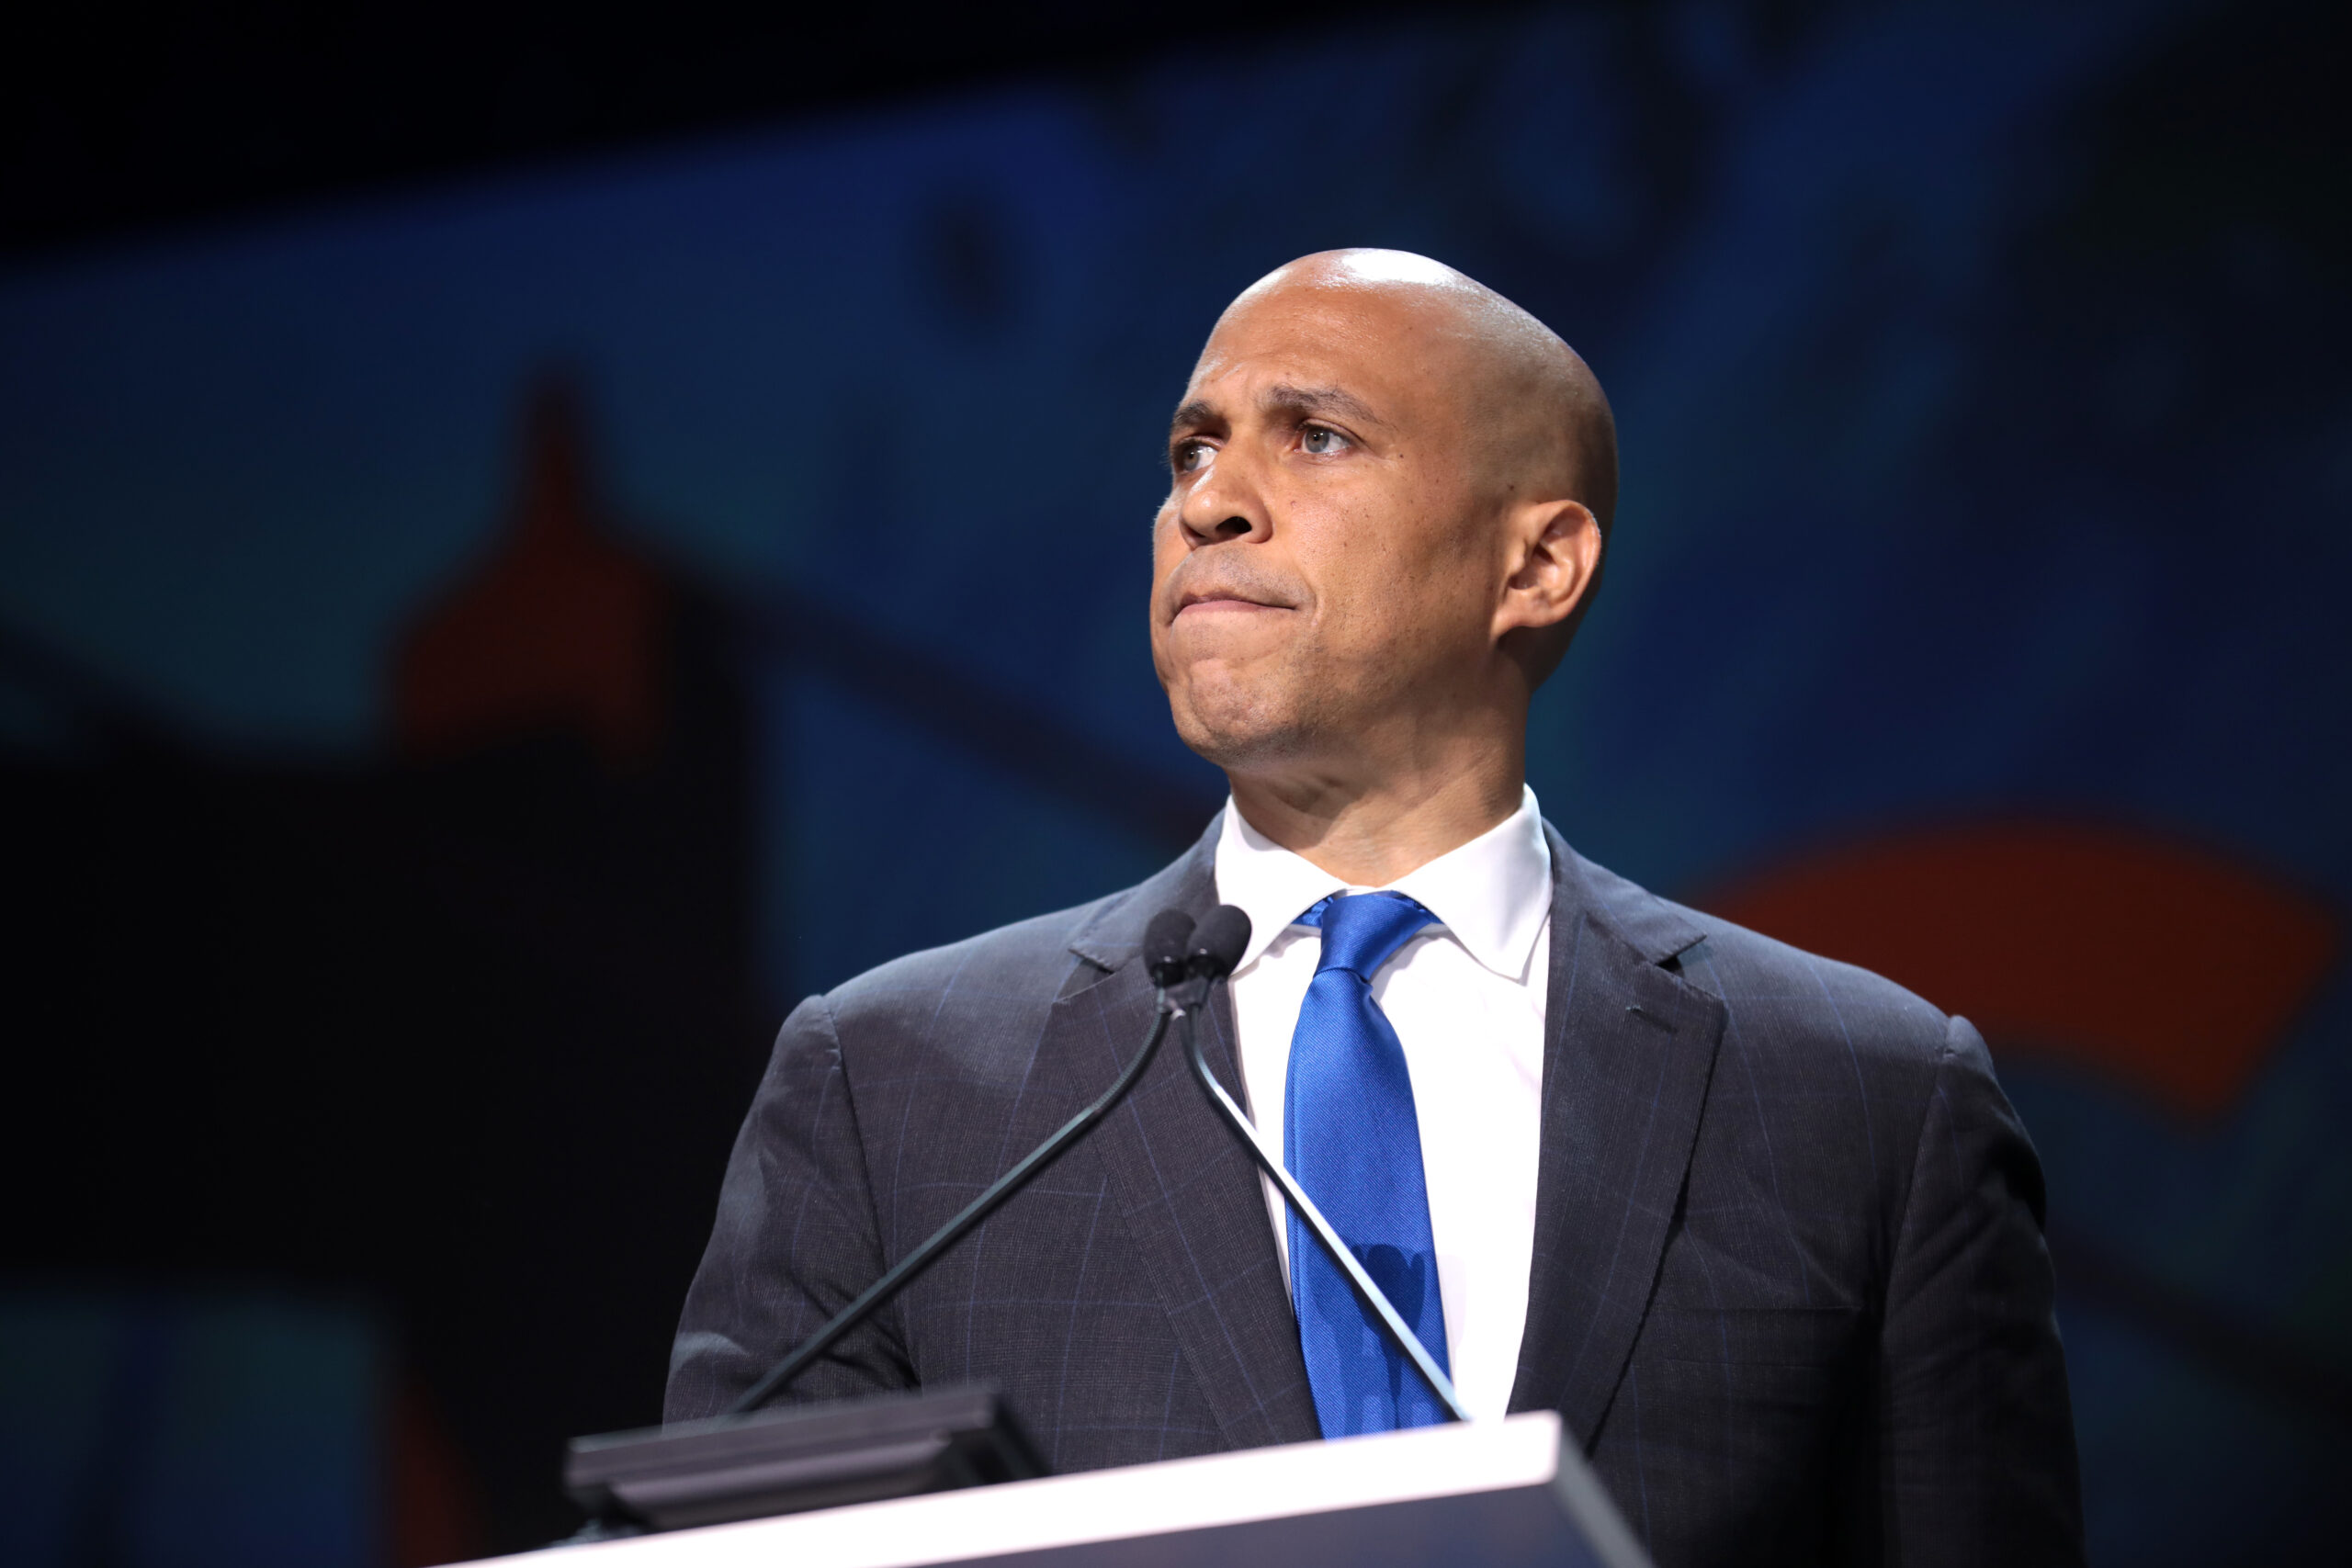 Cory Booker never got a breakout moment to make an impression on voters